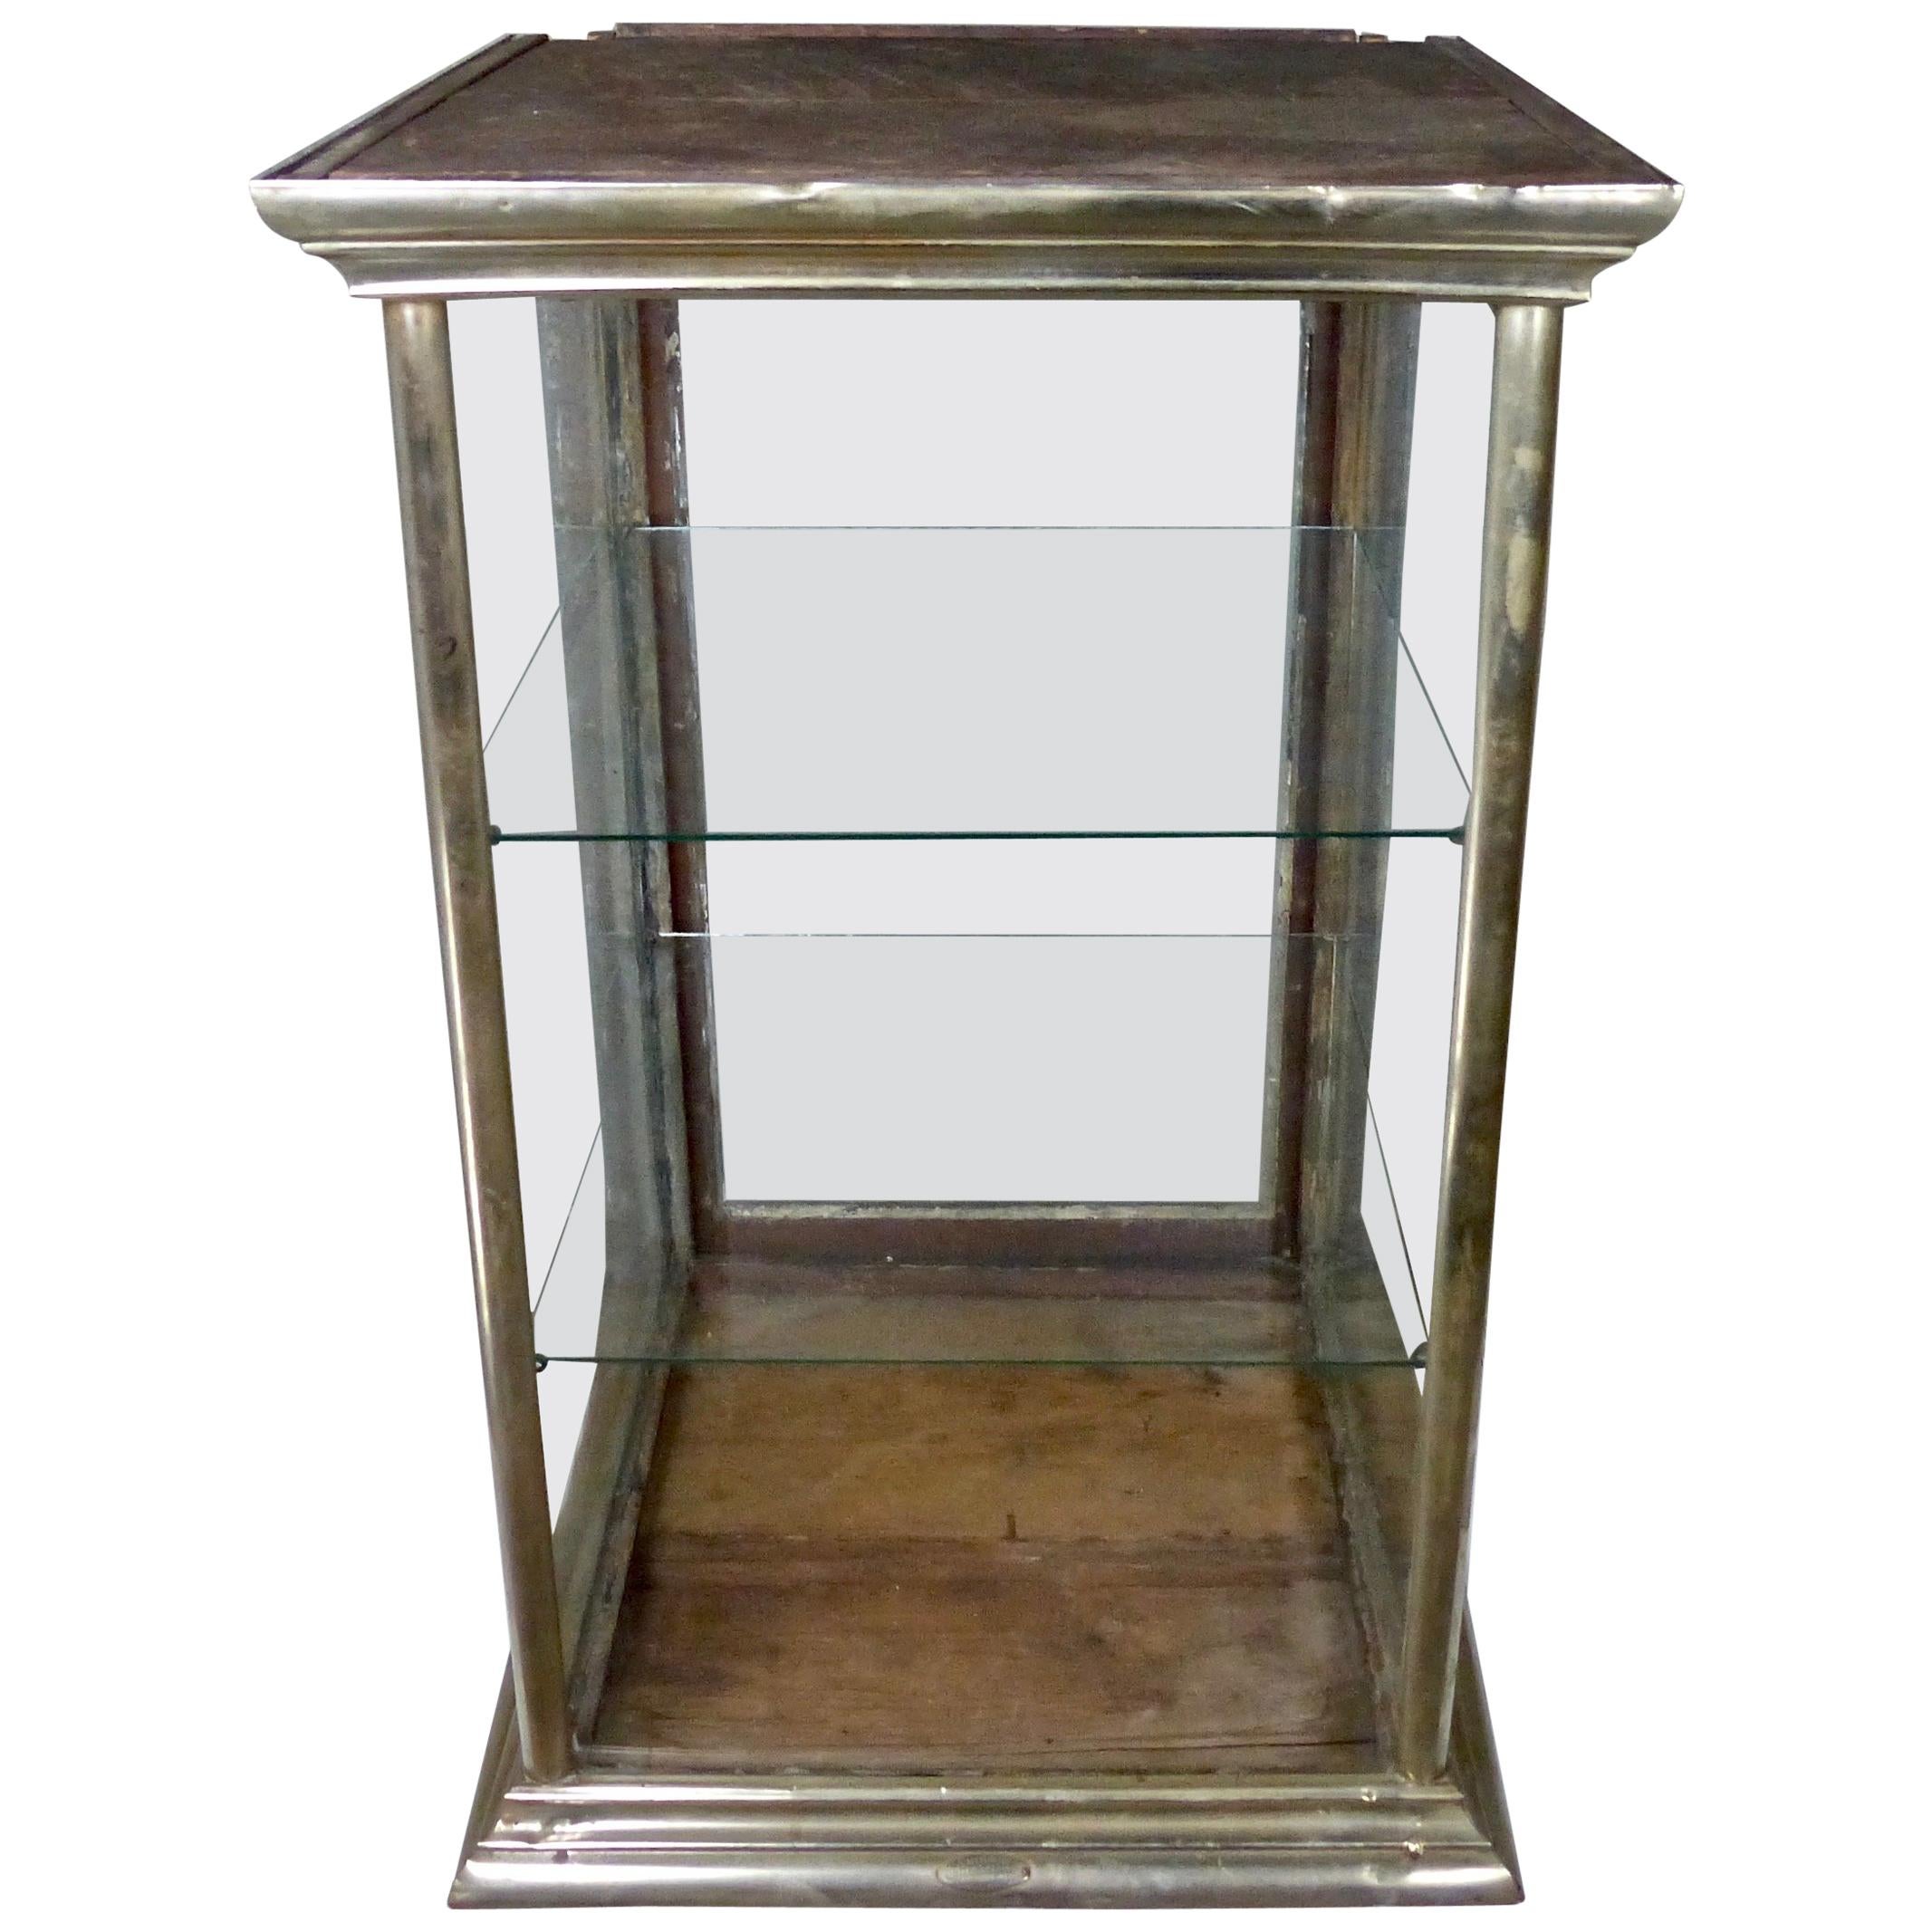 1920 Nickel-Plated Brass Mercantile Counter Top Display Case